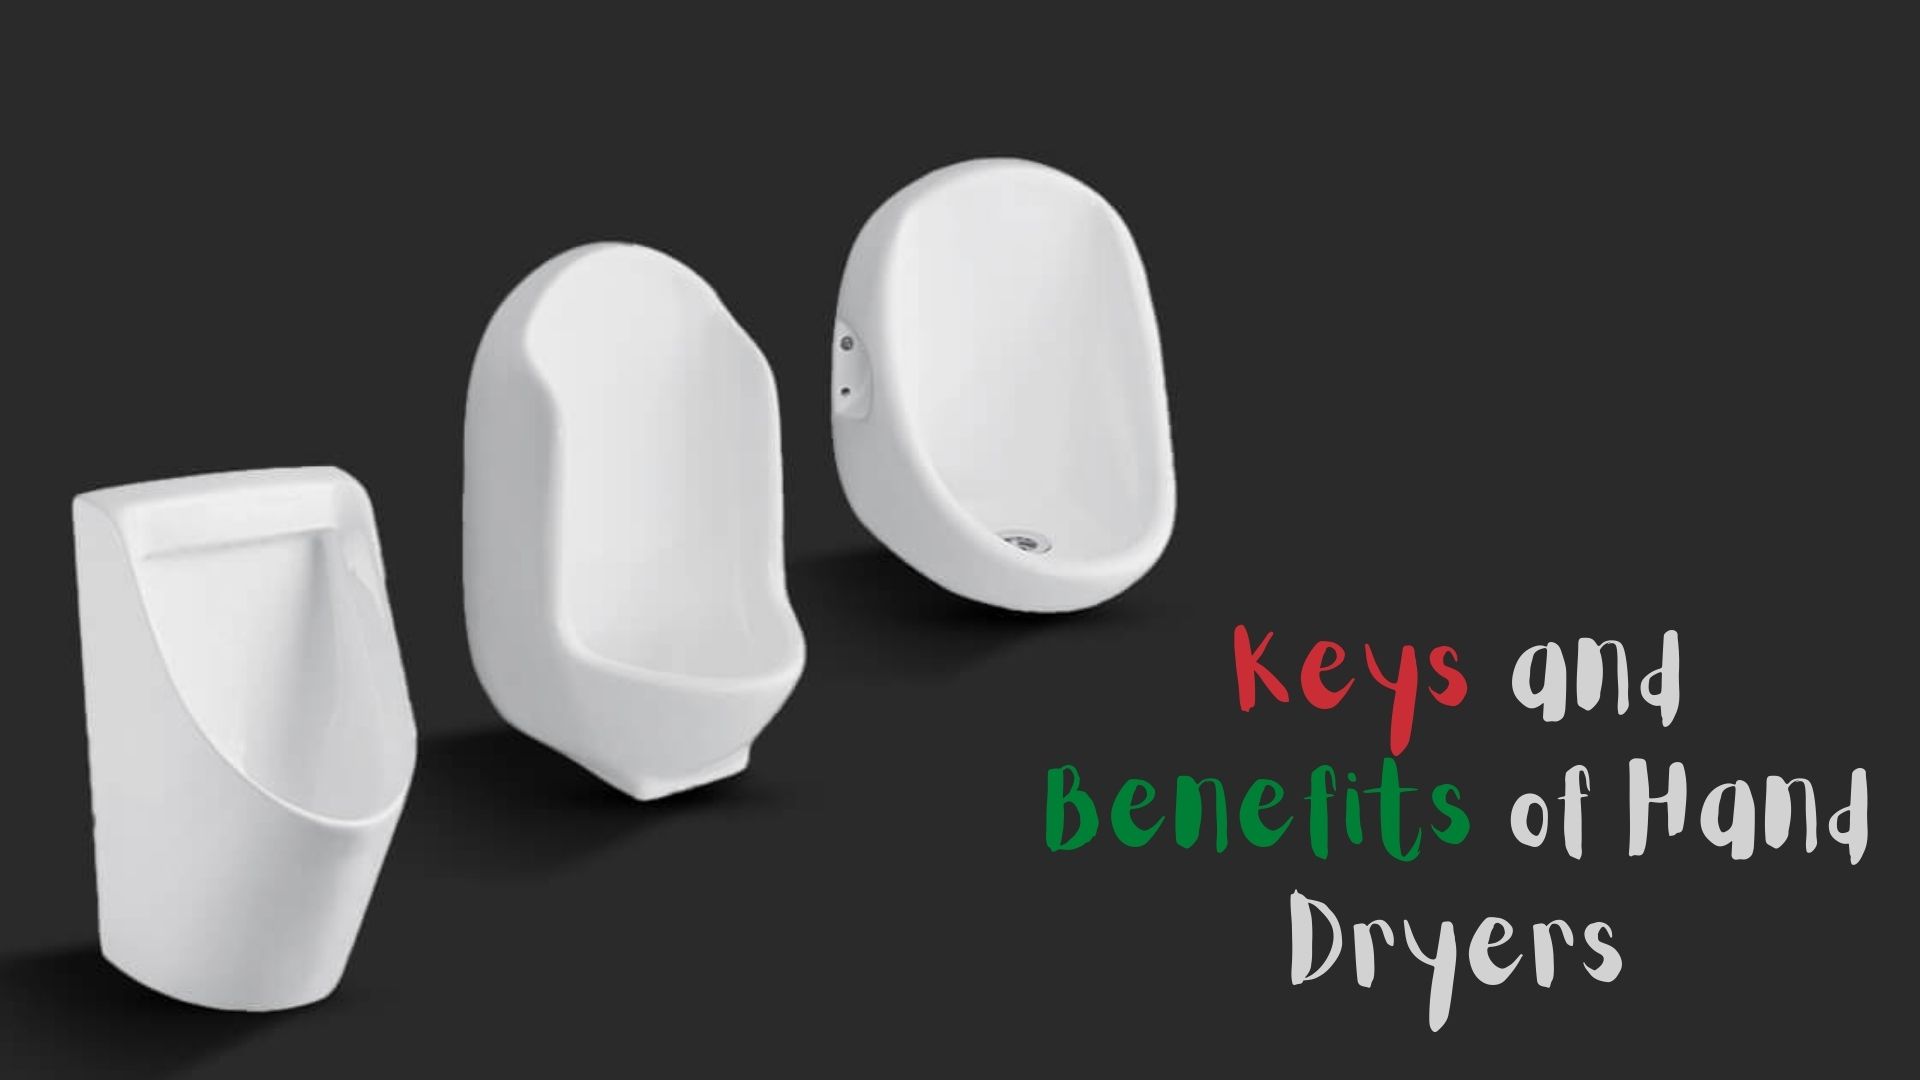 Keys and benefits of hand dryers